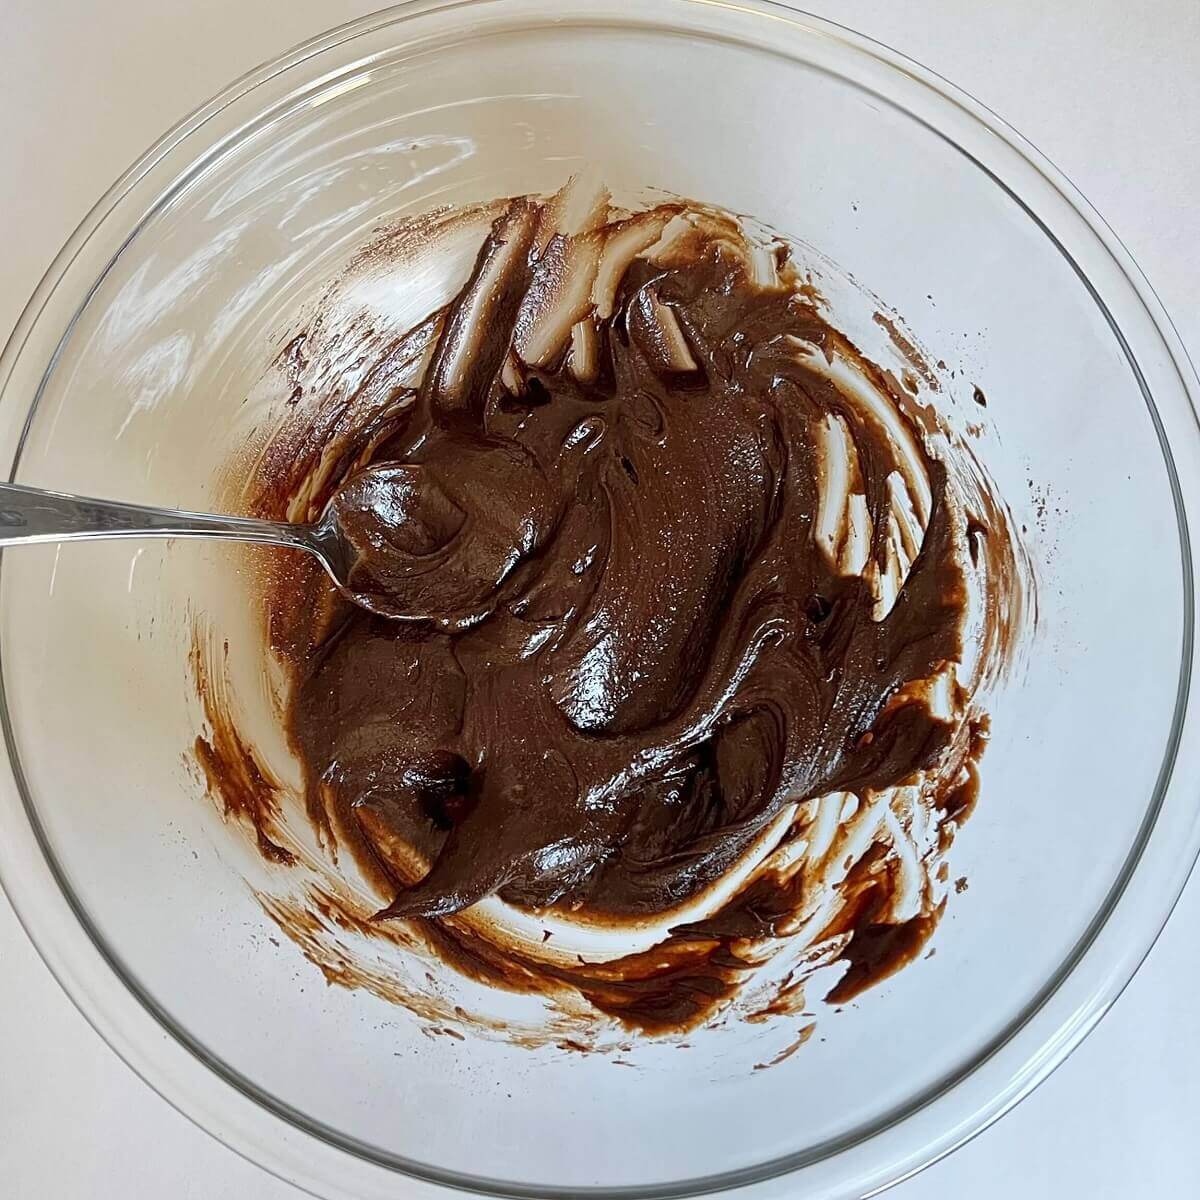 A mixture of carob powder and other ingredients in a glass bowl.